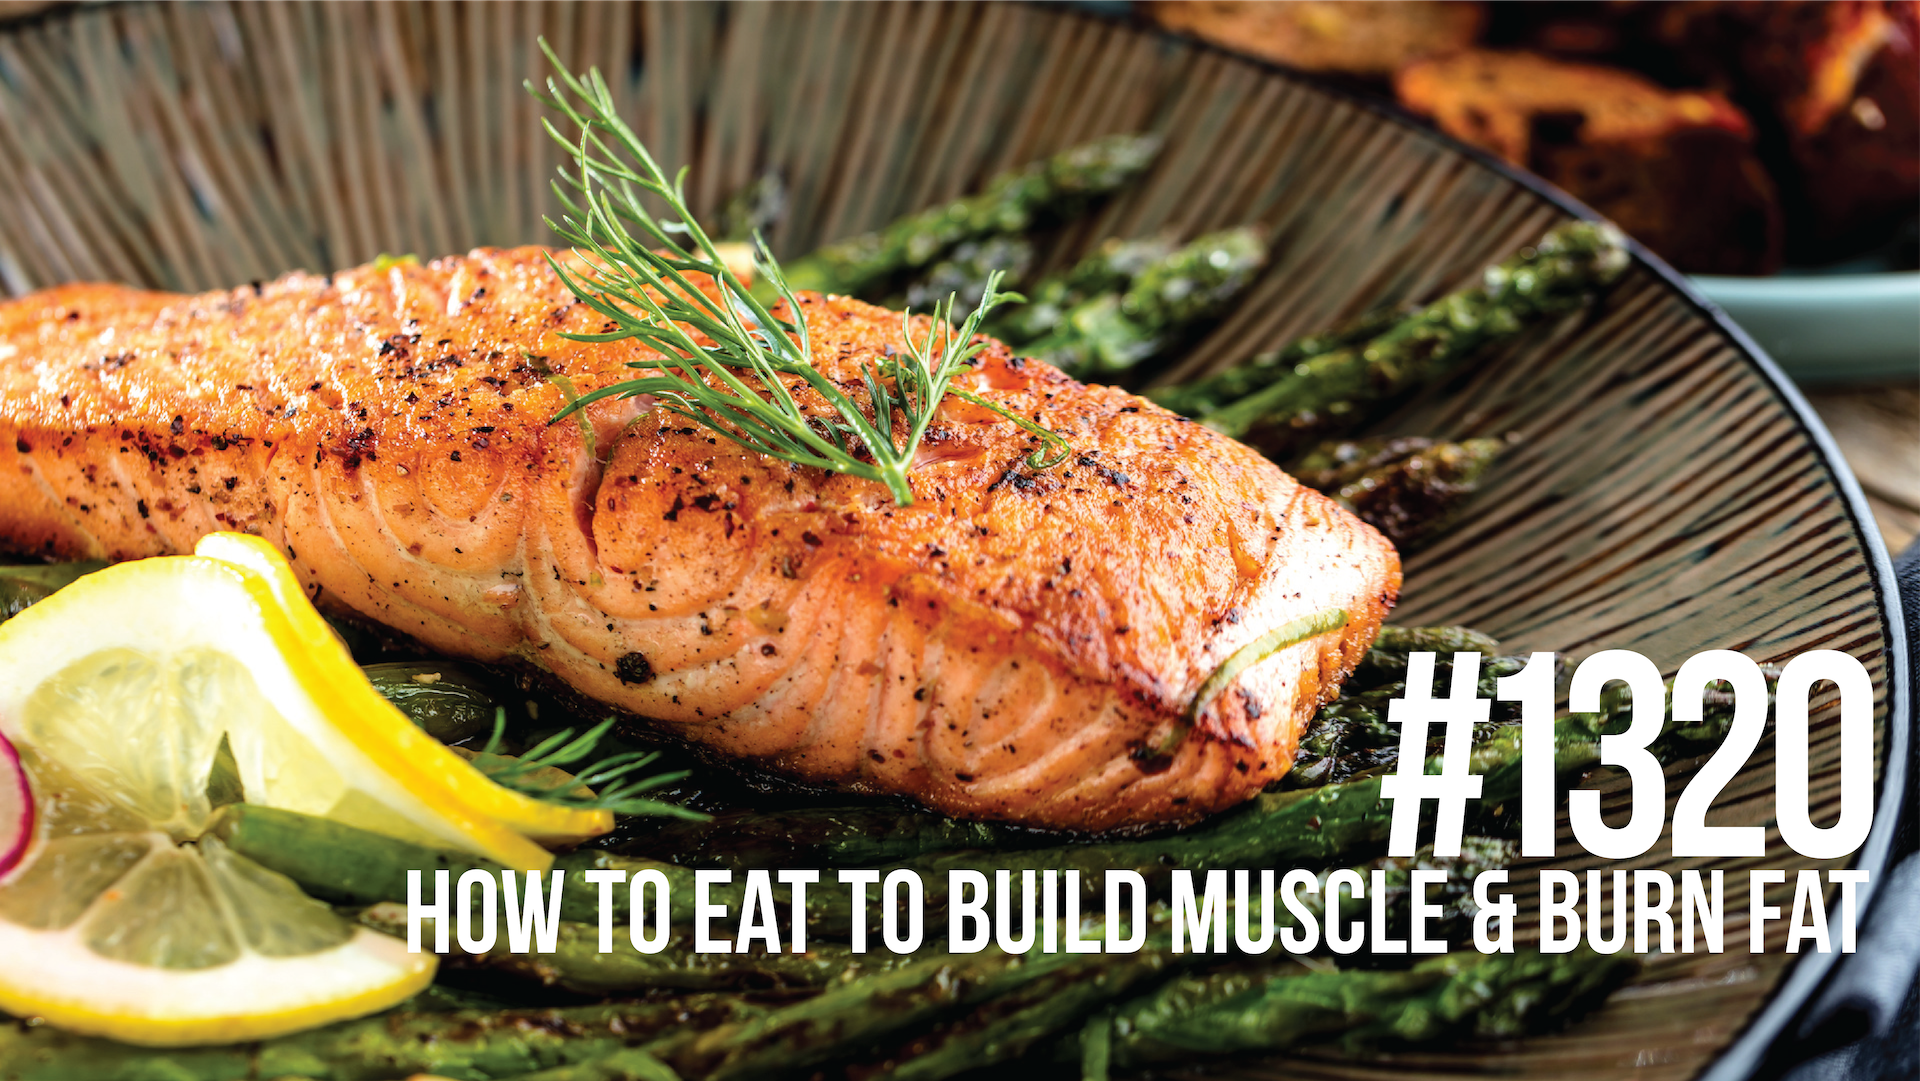 Mind Pump: Raw Fitness Truth: 1320: How to Eat to Build Muscle & Burn Fat